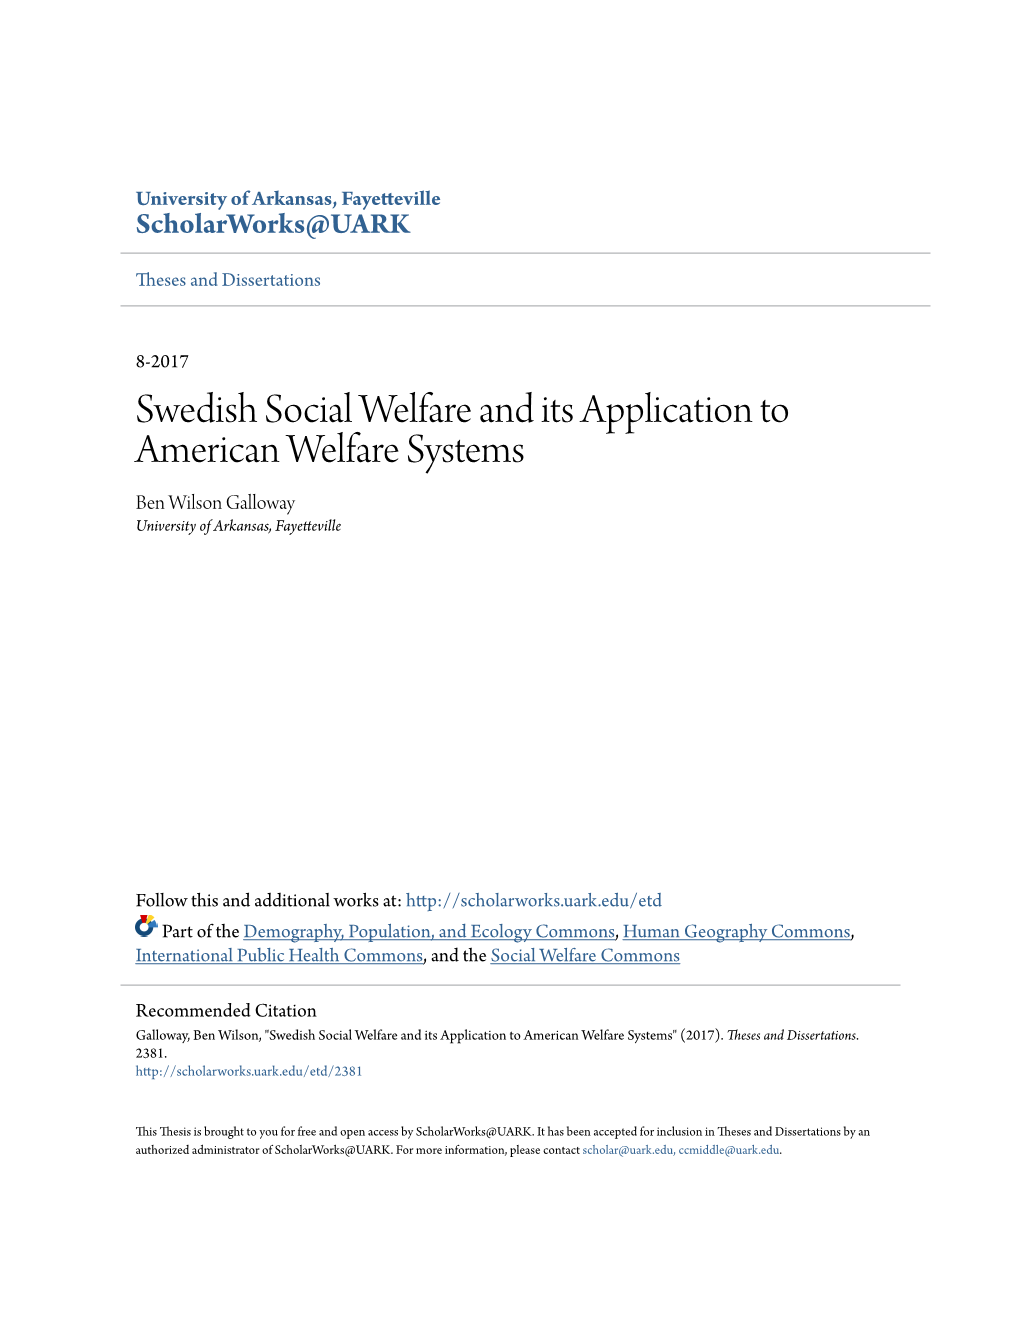 Swedish Social Welfare and Its Application to American Welfare Systems Ben Wilson Galloway University of Arkansas, Fayetteville